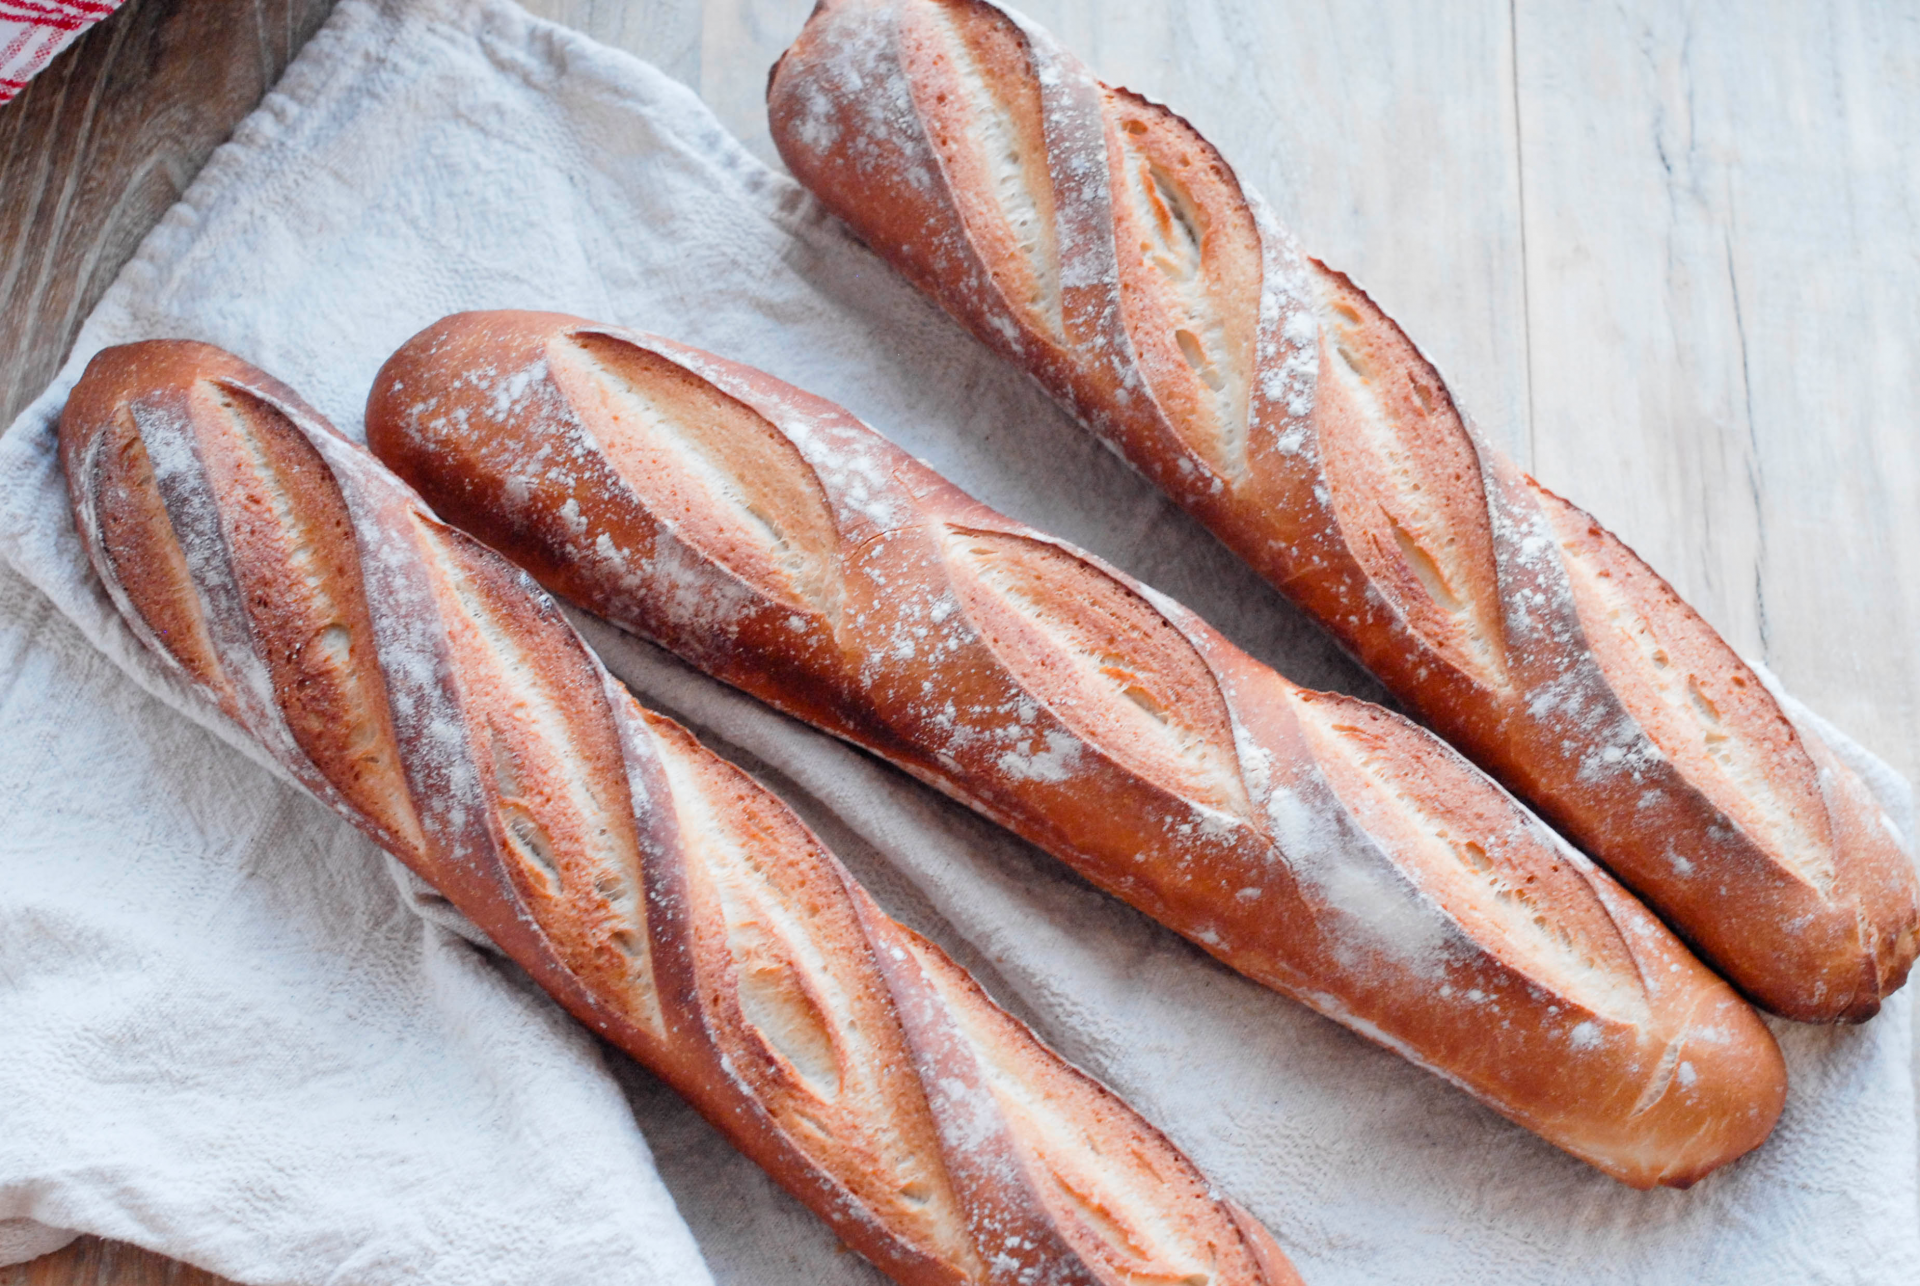 The Secret of French La Baguette: What Makes The Most Iconic Symbol